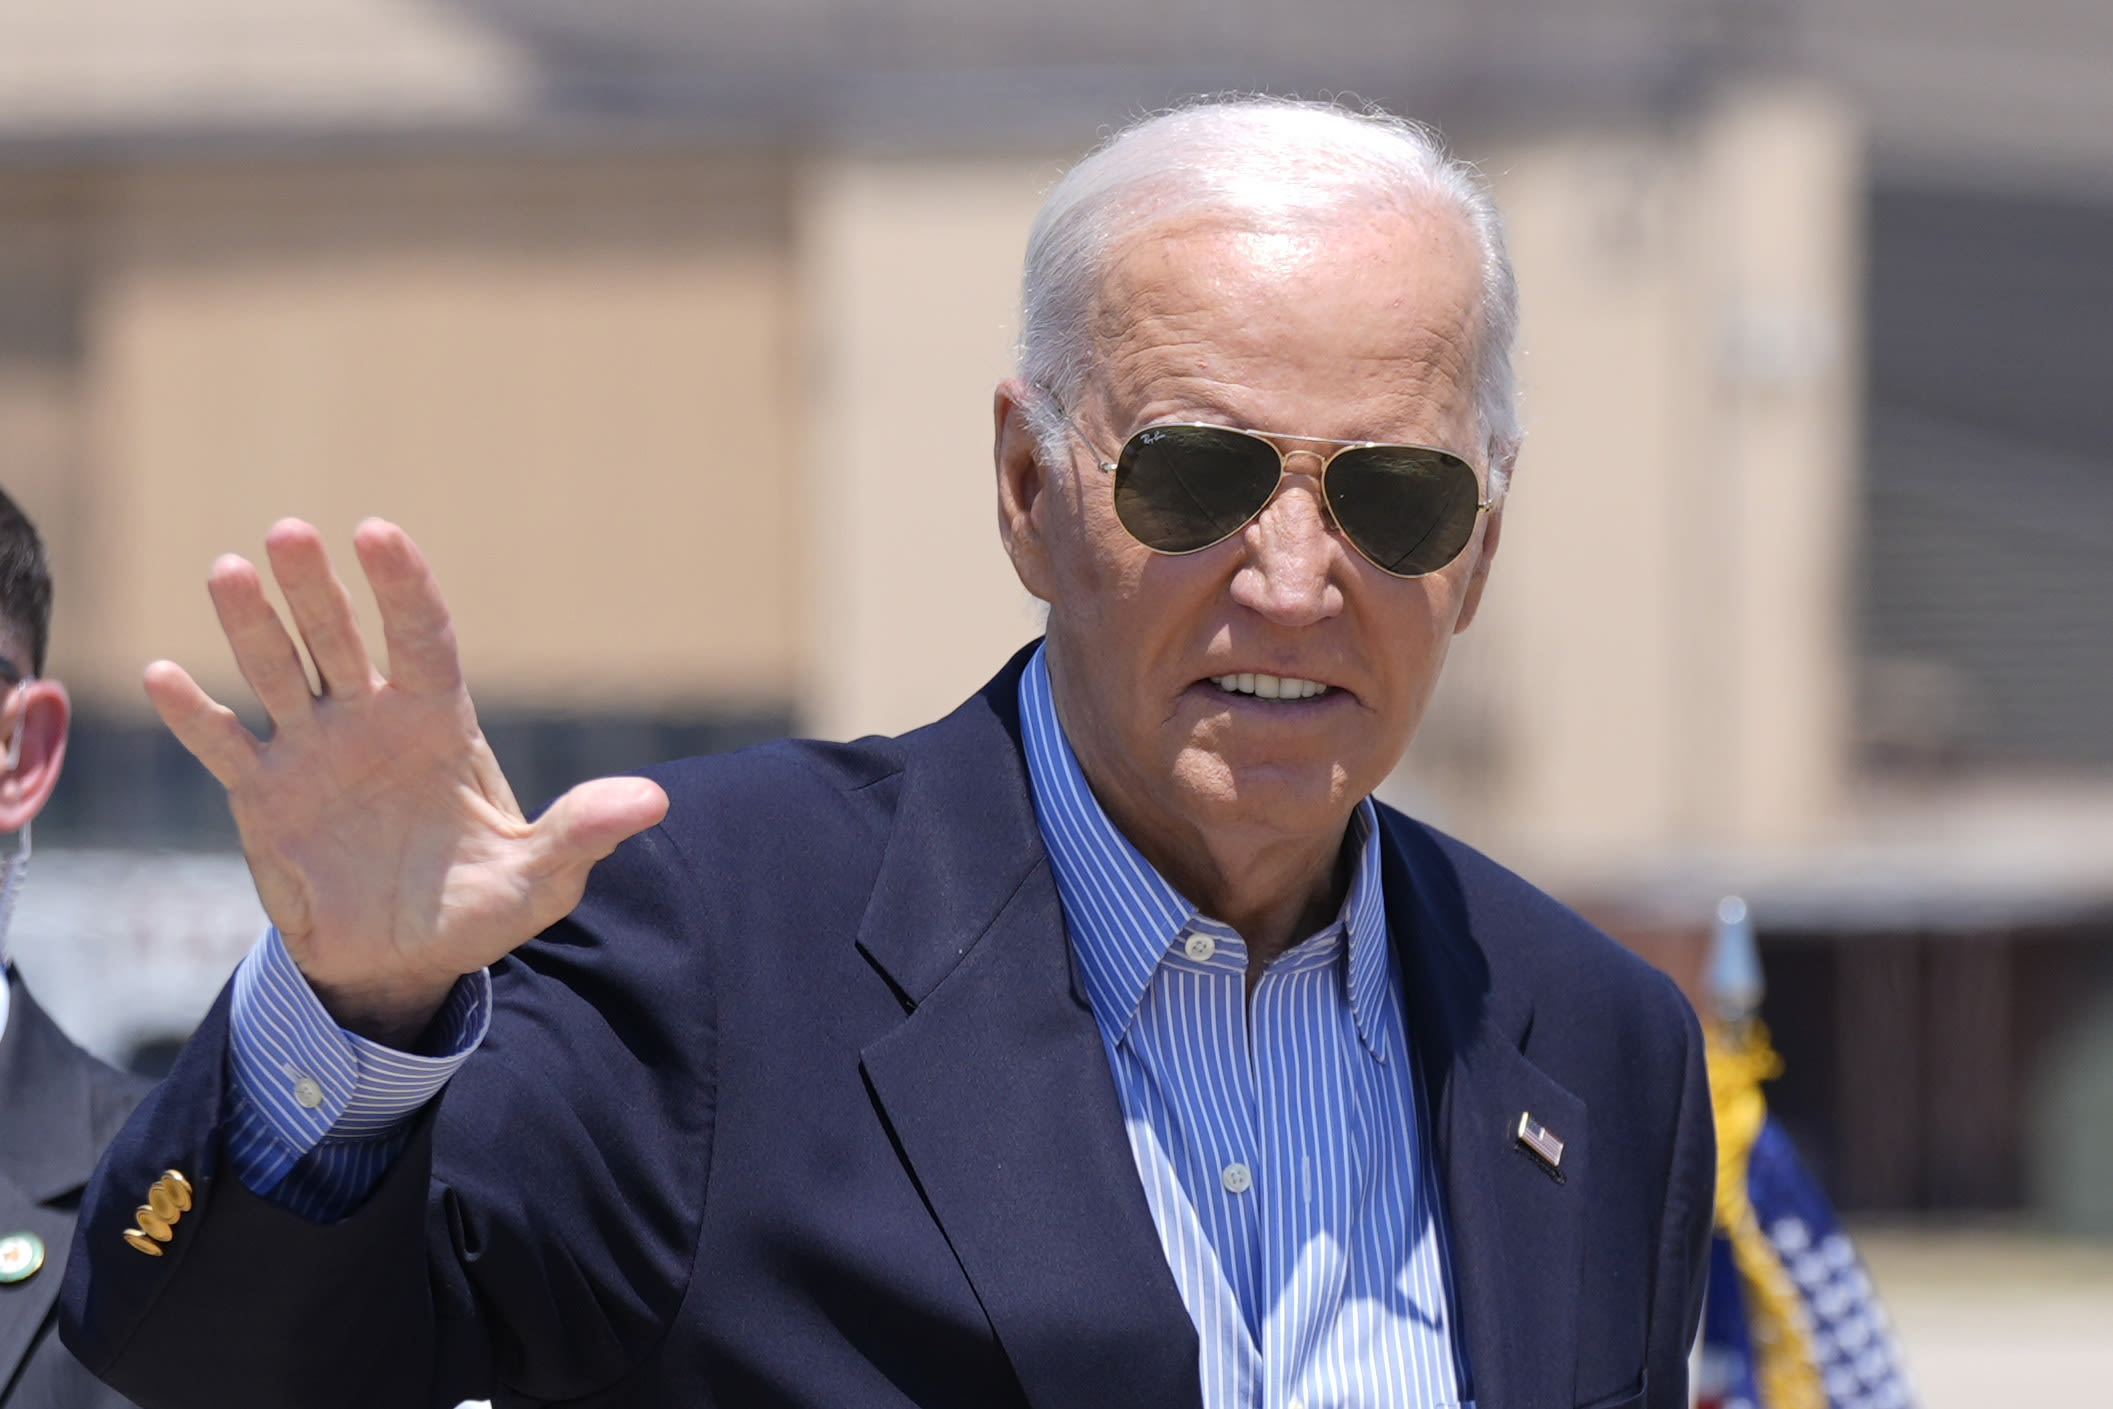 Joe Biden critics unmoved by interview performance: 'Therapy session'